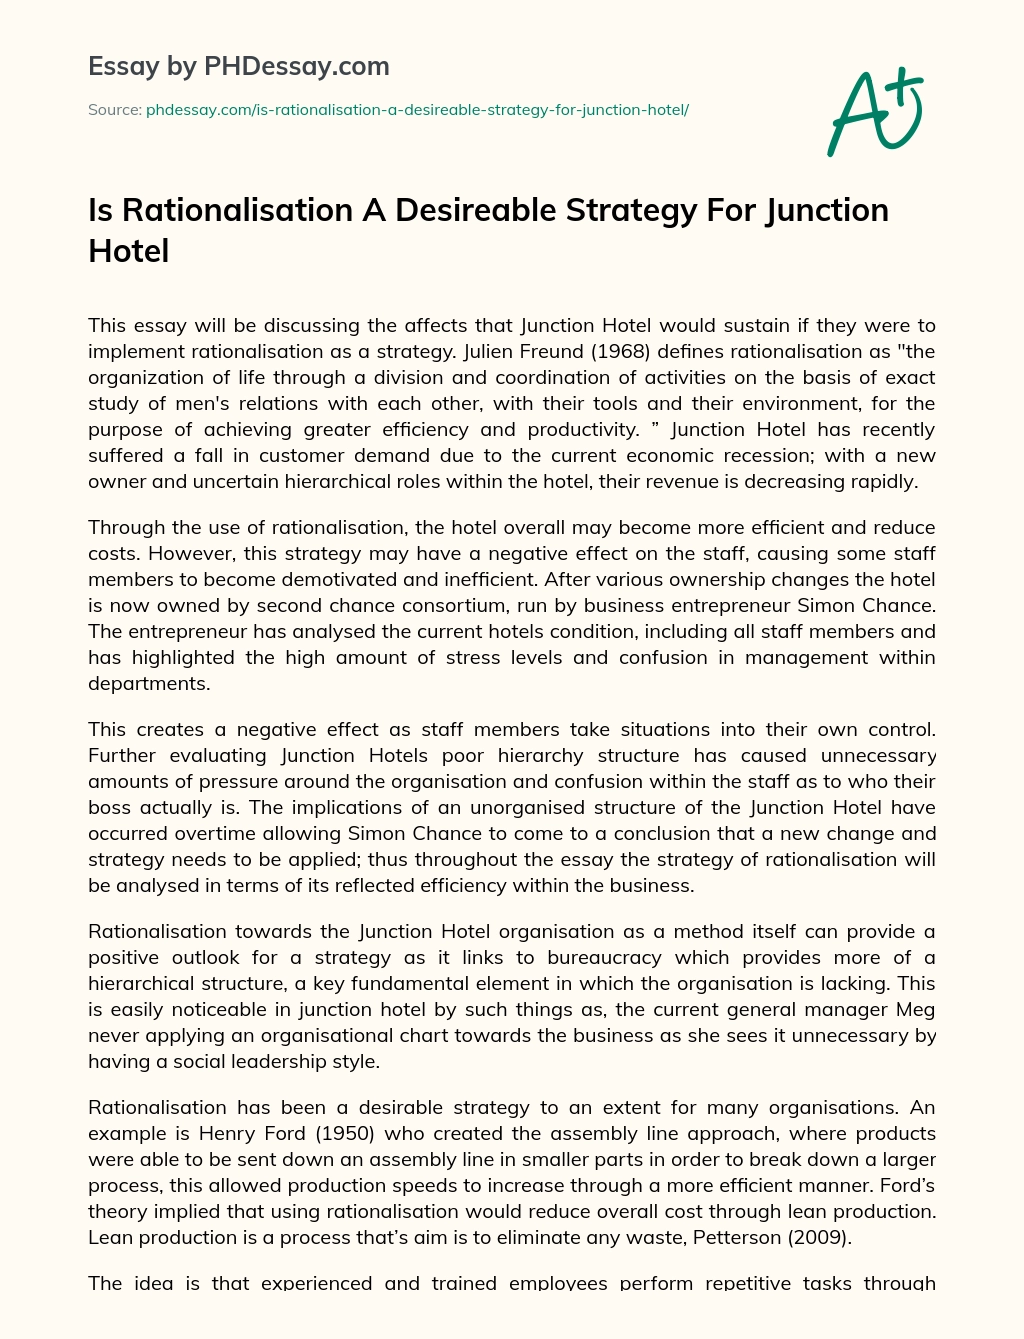 Is Rationalisation A Desireable Strategy For Junction Hotel essay